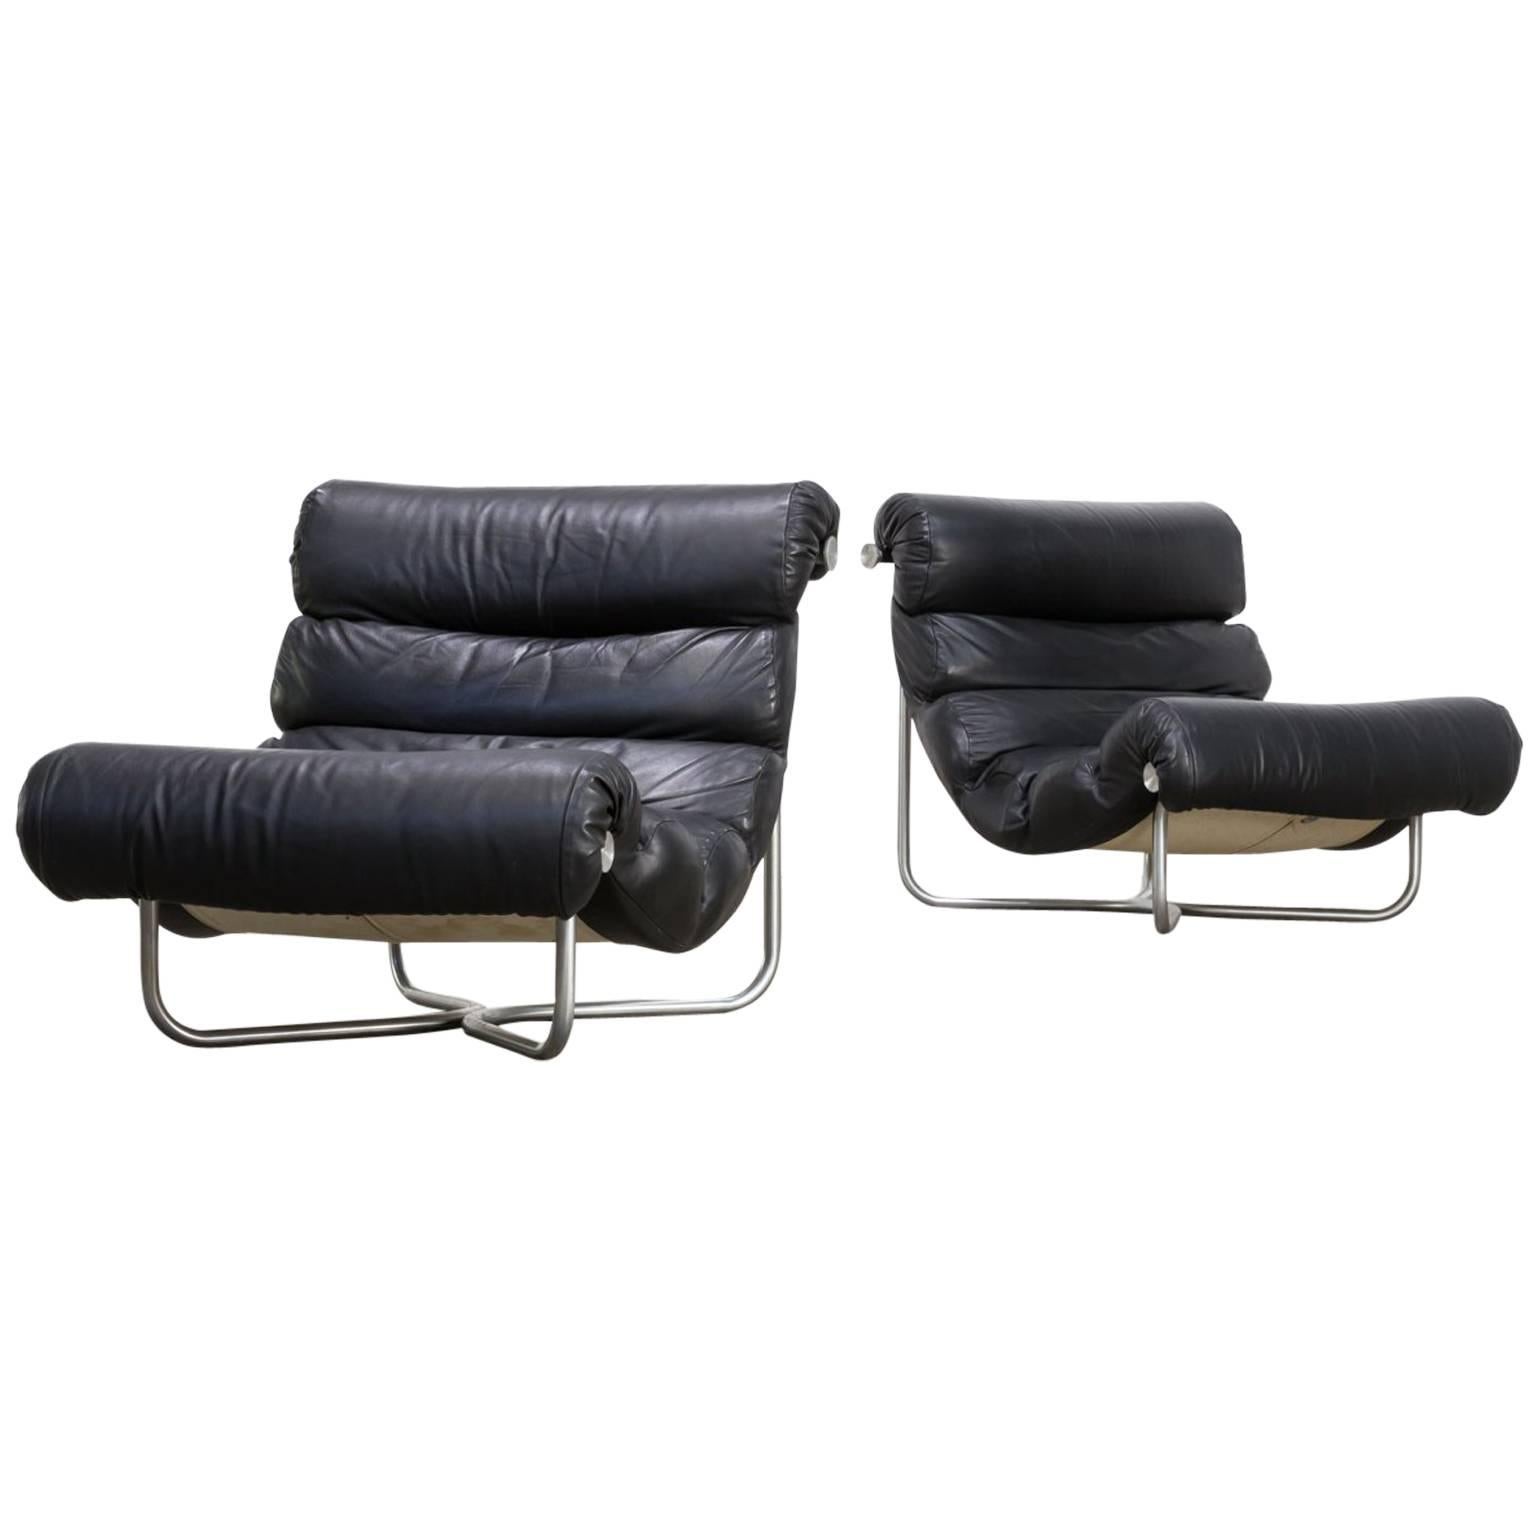 Georges van Rijck ‘Glasgow’ Lounge Fauteuils & Ottoman for Beaufort Set of Three For Sale